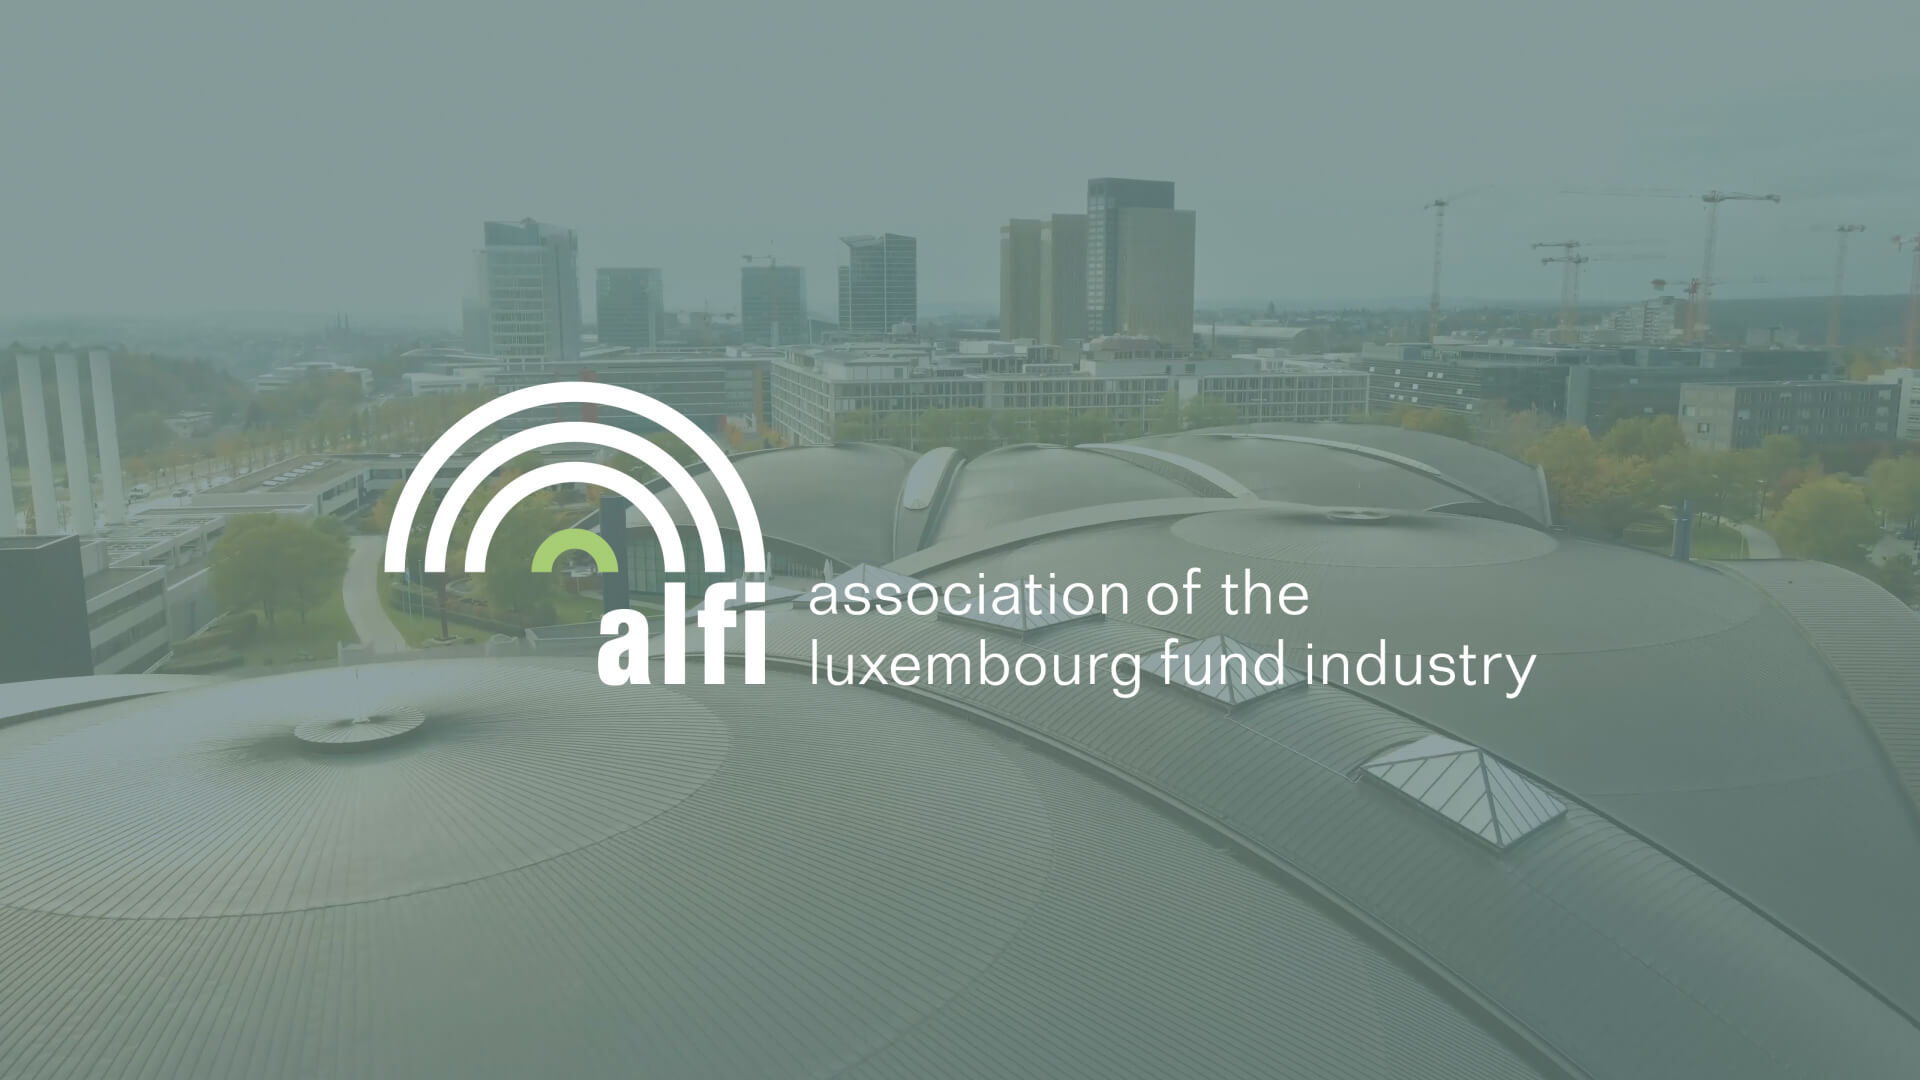 Cover image for post: Association of the Luxembourg Fund Industry (ALFI)